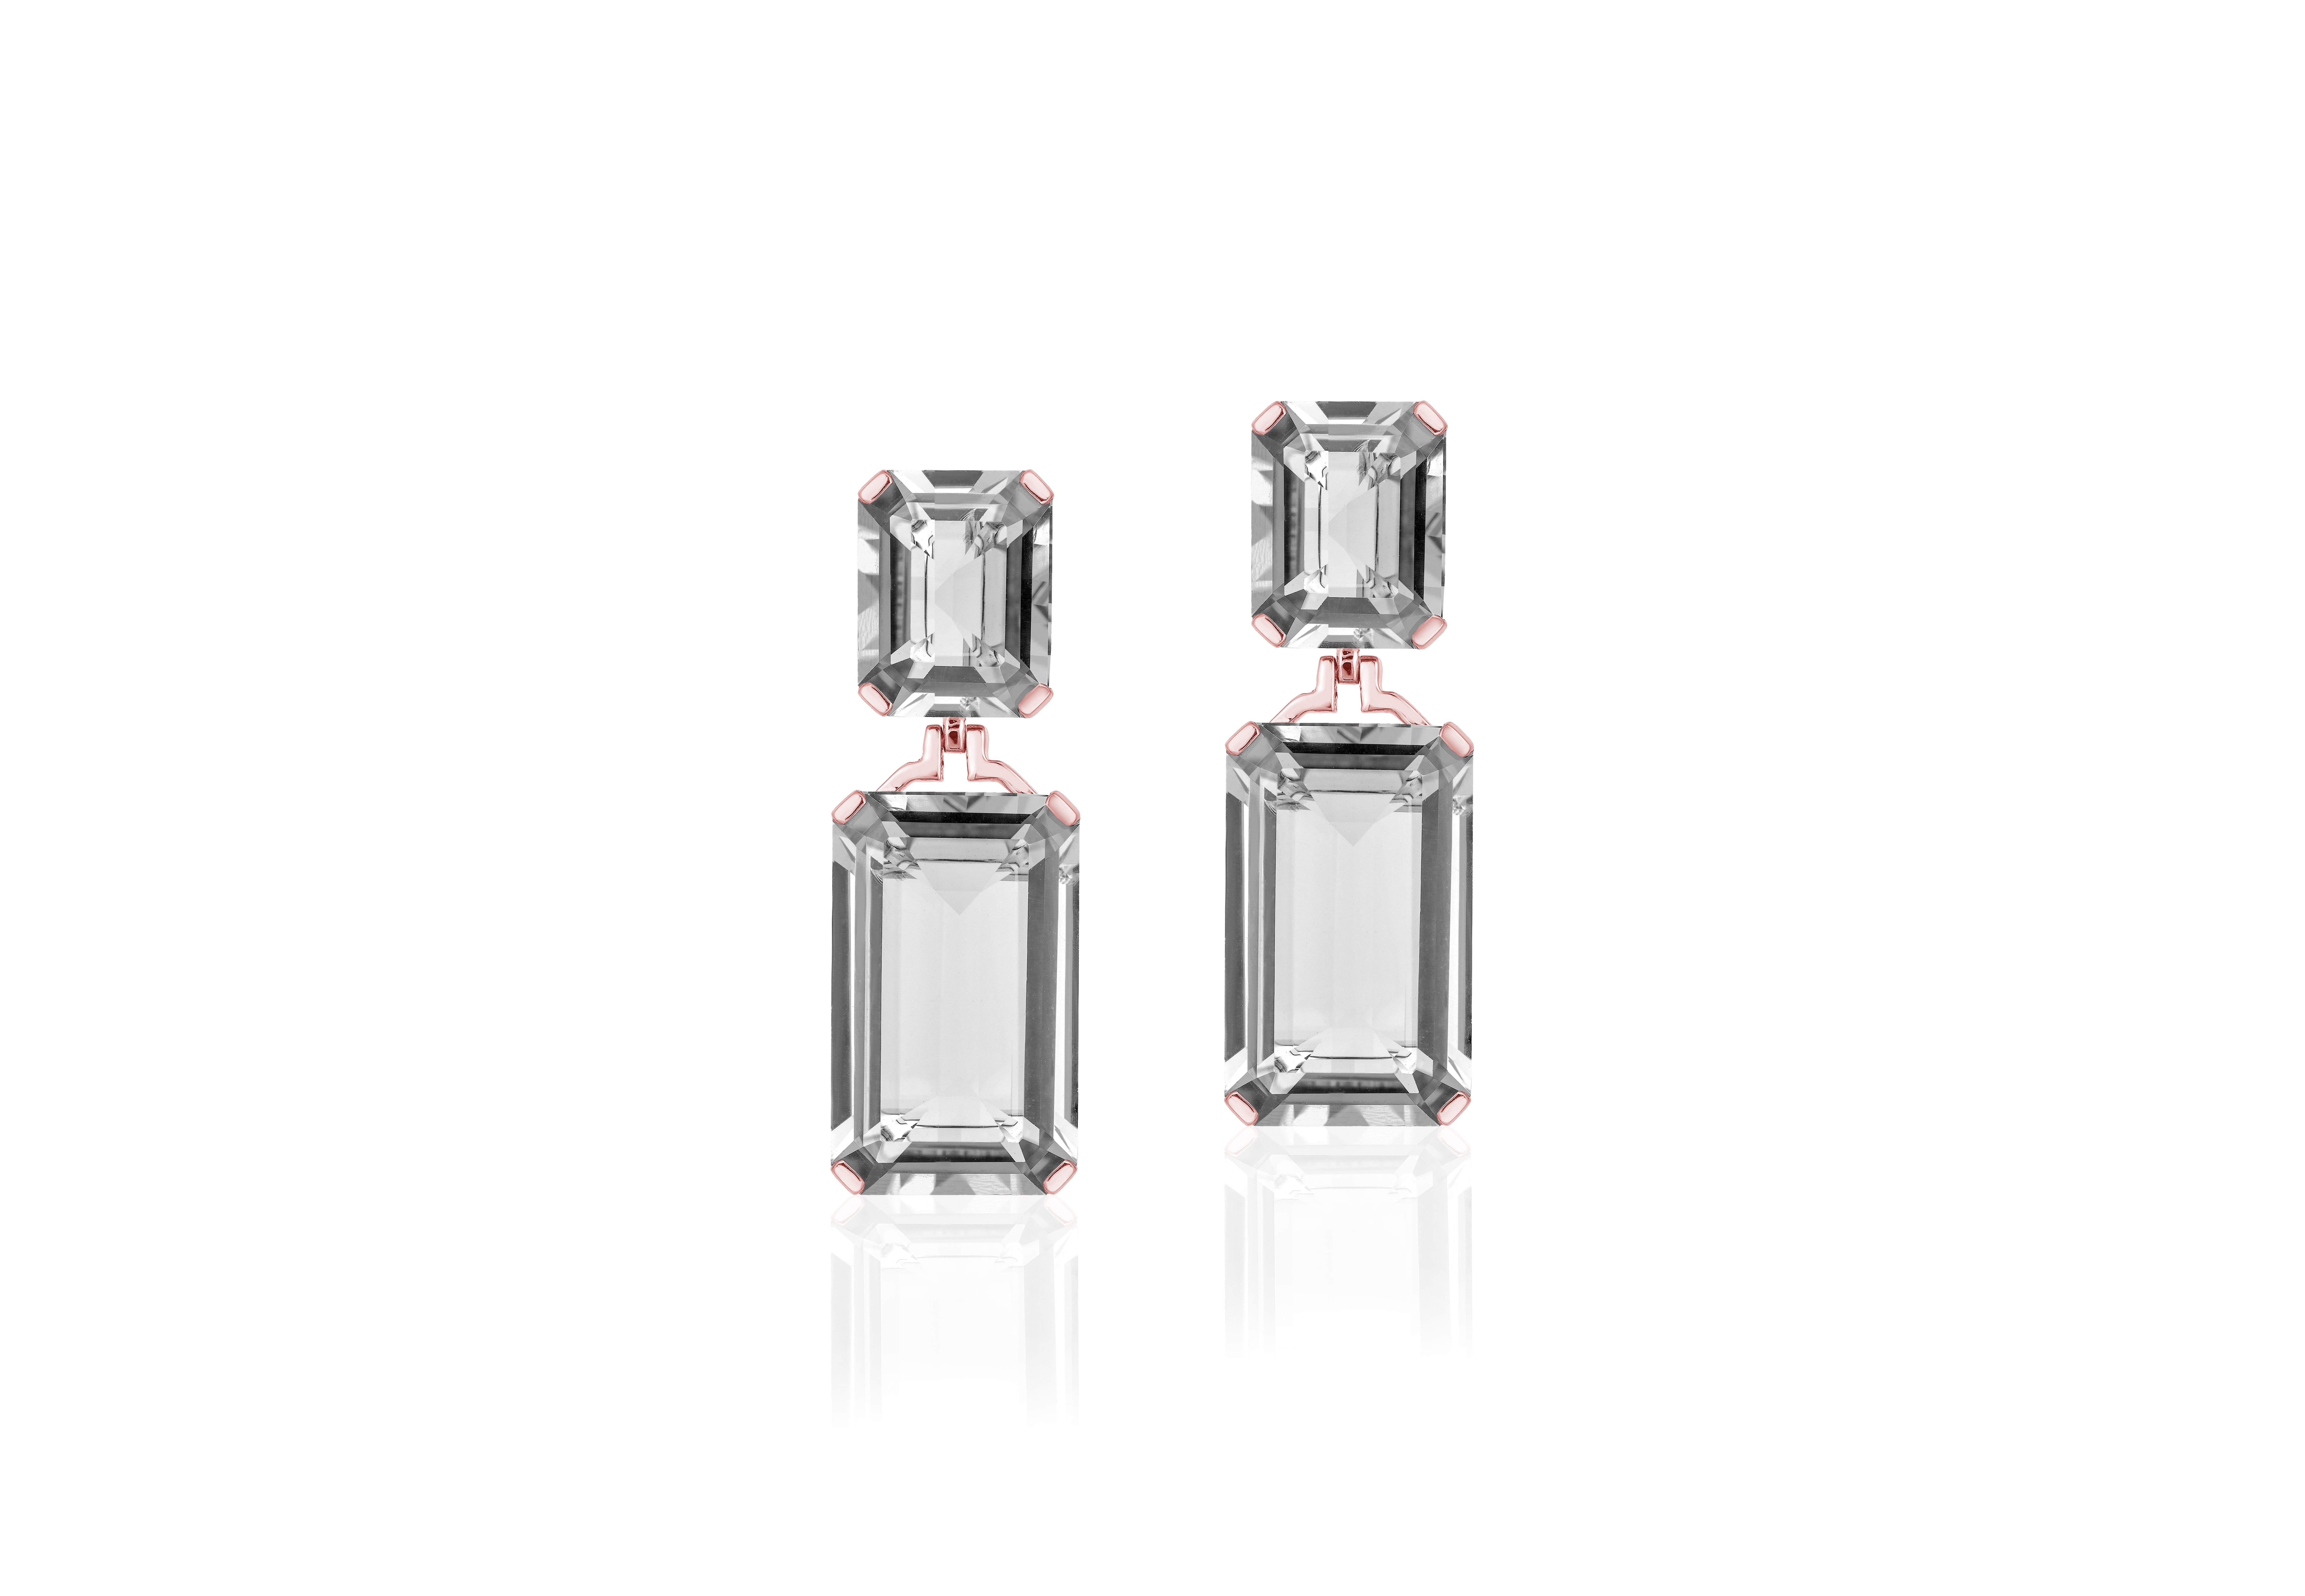 These Rock Crystal Emerald Cut Earrings in 18K Rose Gold from the 'Gossip' Collection are a stunning and unique accessory. The clear, transparent beauty of the rock crystal, combined with the elegant emerald cut design, creates a timeless and